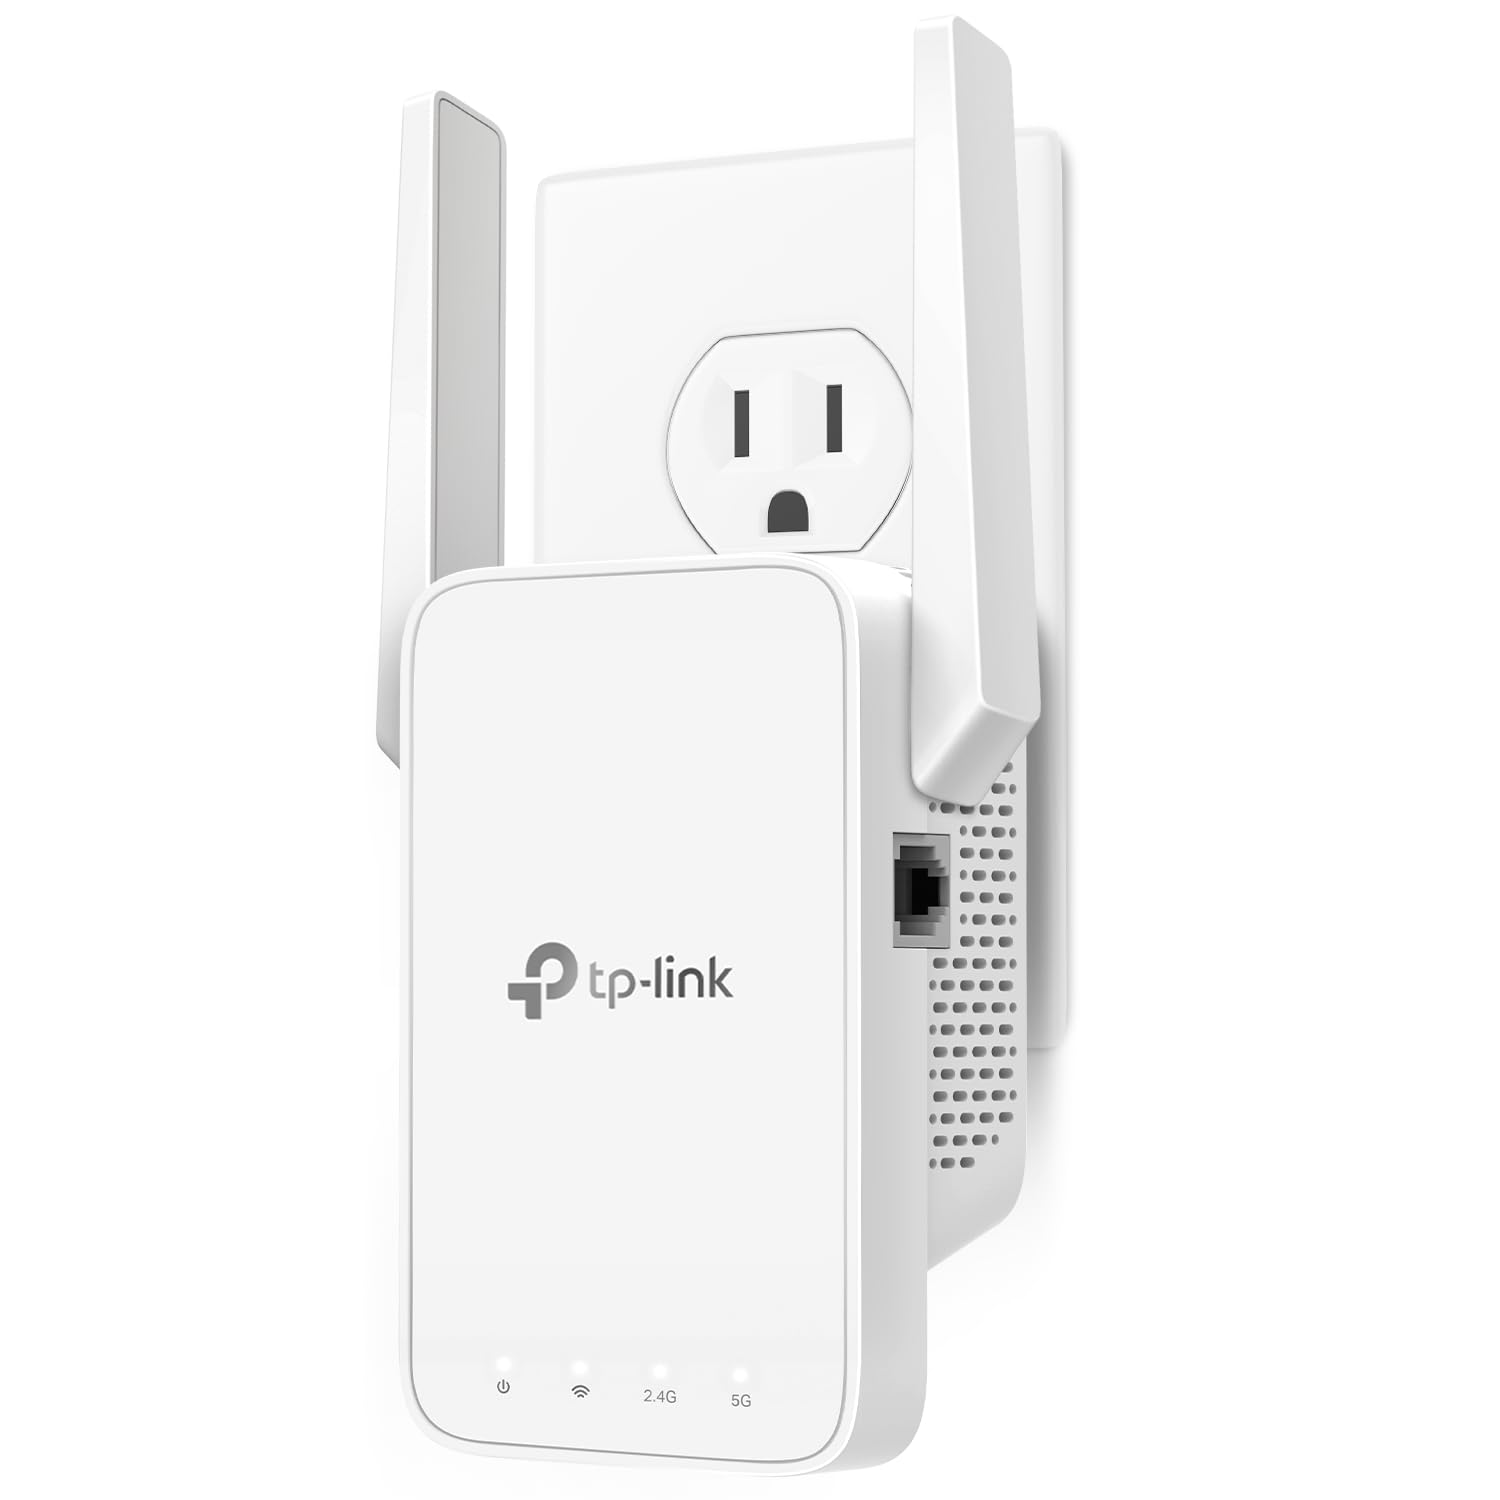 TP-Link AC1200 WiFi Extender,  1.2Gbps signal booster for home, Dual Band 5GHz/2.4GHz, Covers Up to 1500 Sq.ft and 30 Devices ,support Onemesh, One Ethernet Port (RE315) White,  Only $19.99